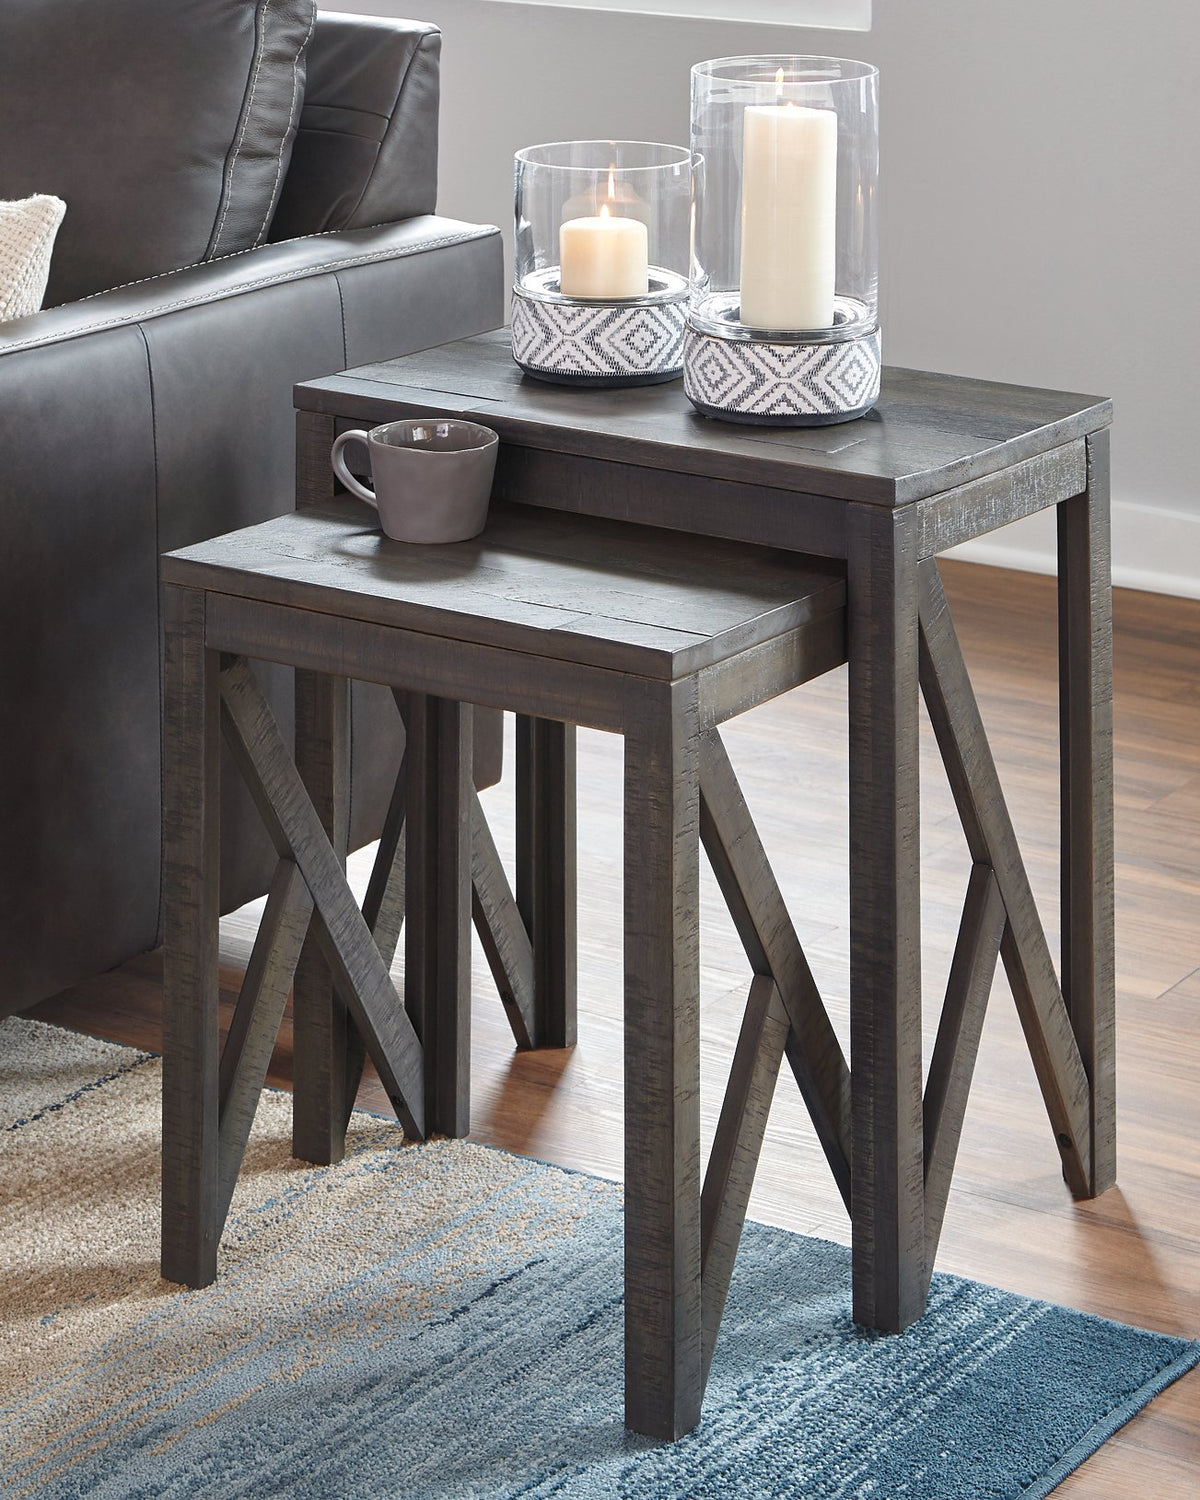 Emerdale Accent Table (Set of 2)  Half Price Furniture